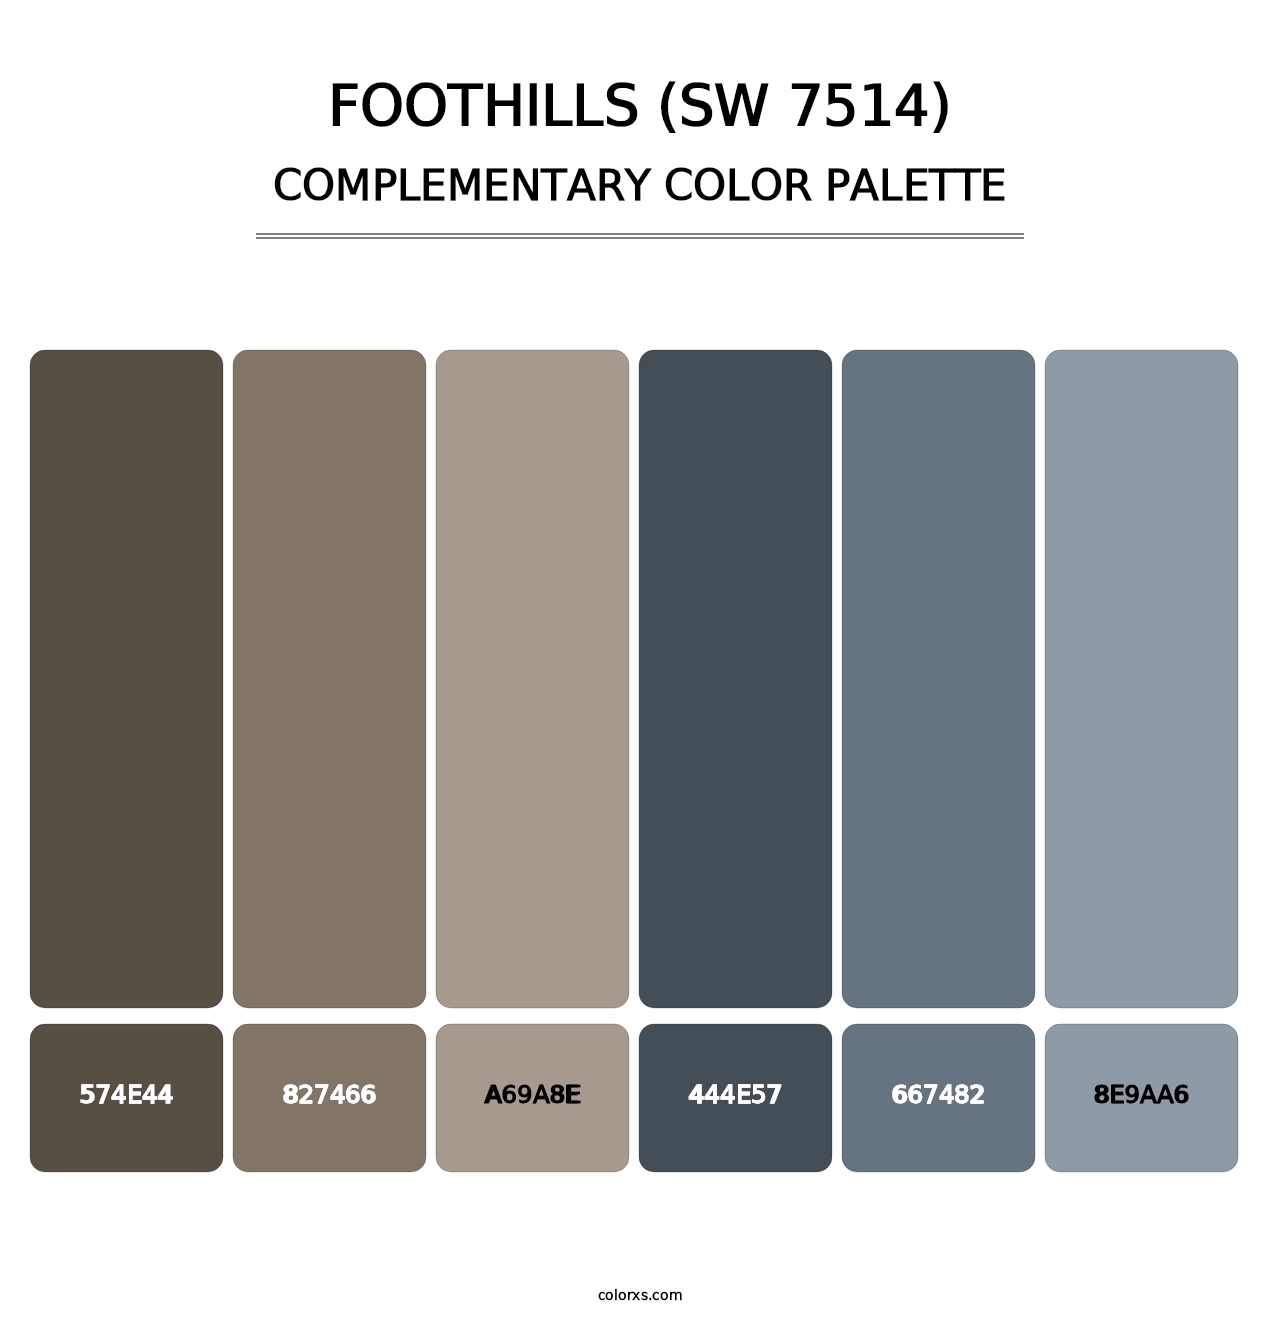 Foothills (SW 7514) - Complementary Color Palette